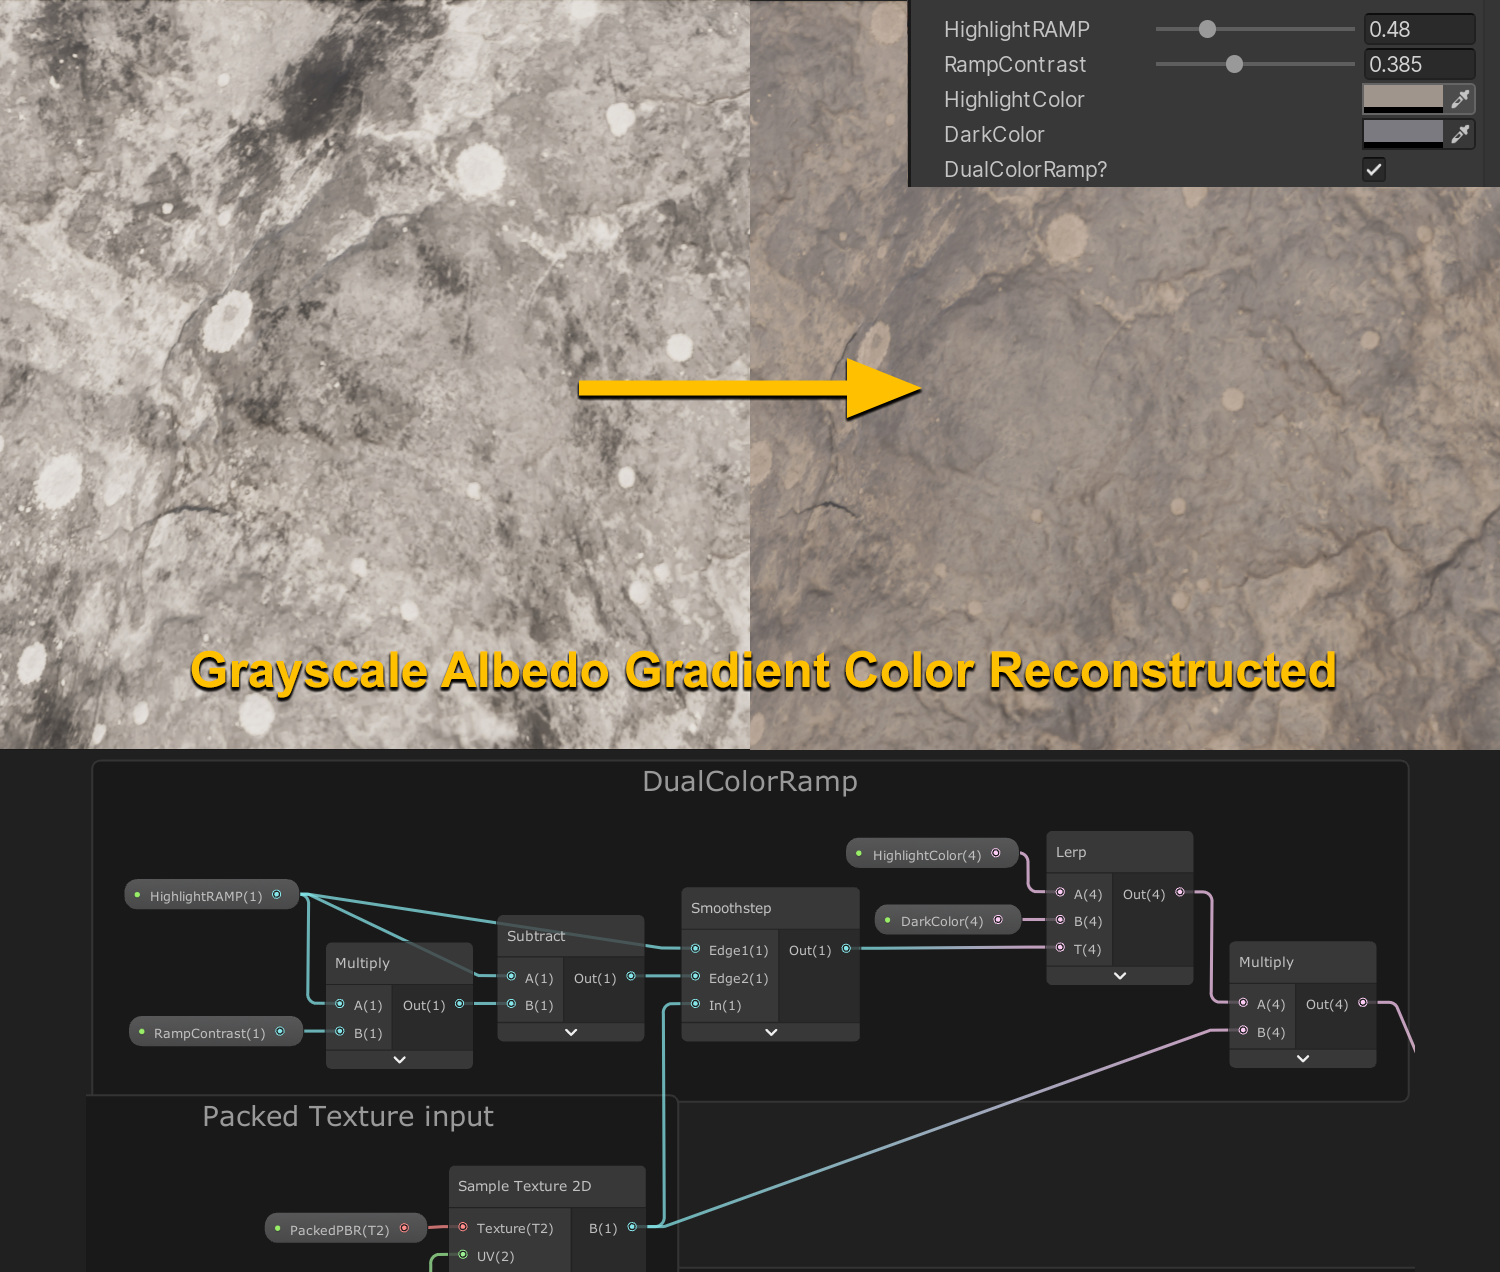 Highlight and Dark coloring with ramp contrast adjustment for Albedo reconstruction.